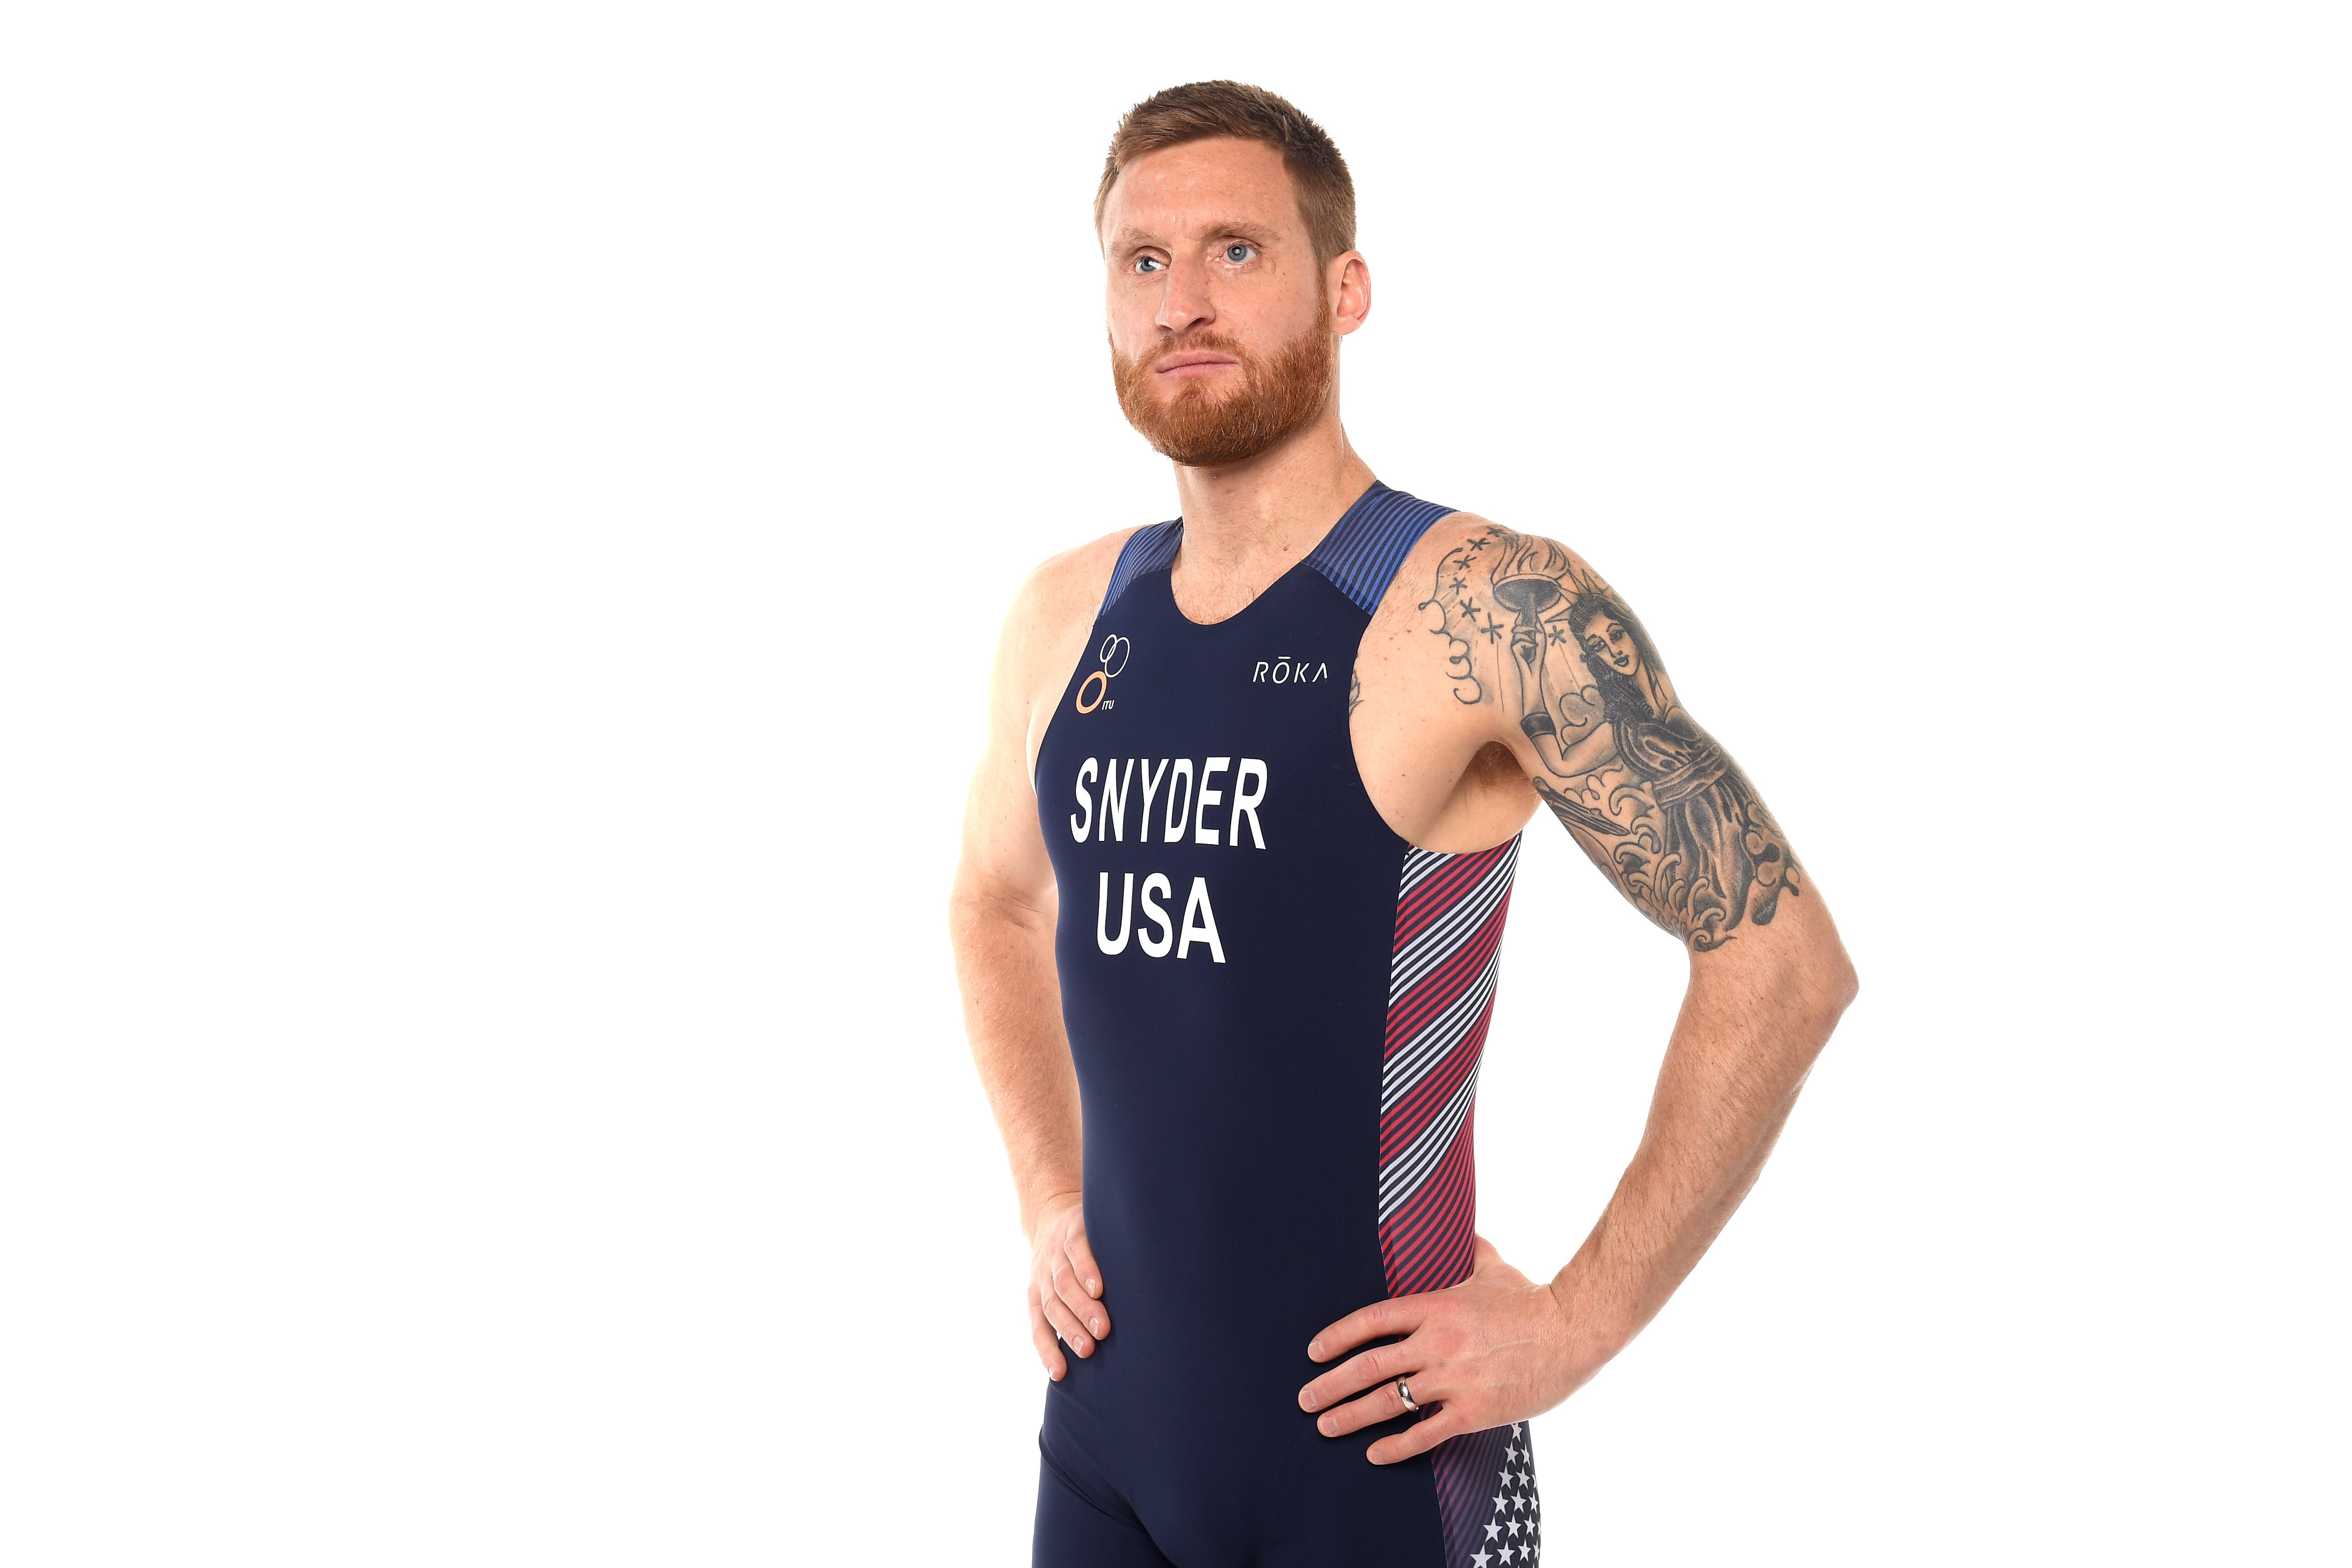 Para triathlete Brad Snyder poses for a portrait during the Team USA Tokyo 2020 Olympics shoot on November 20, 2019 in West Hollywood, California.